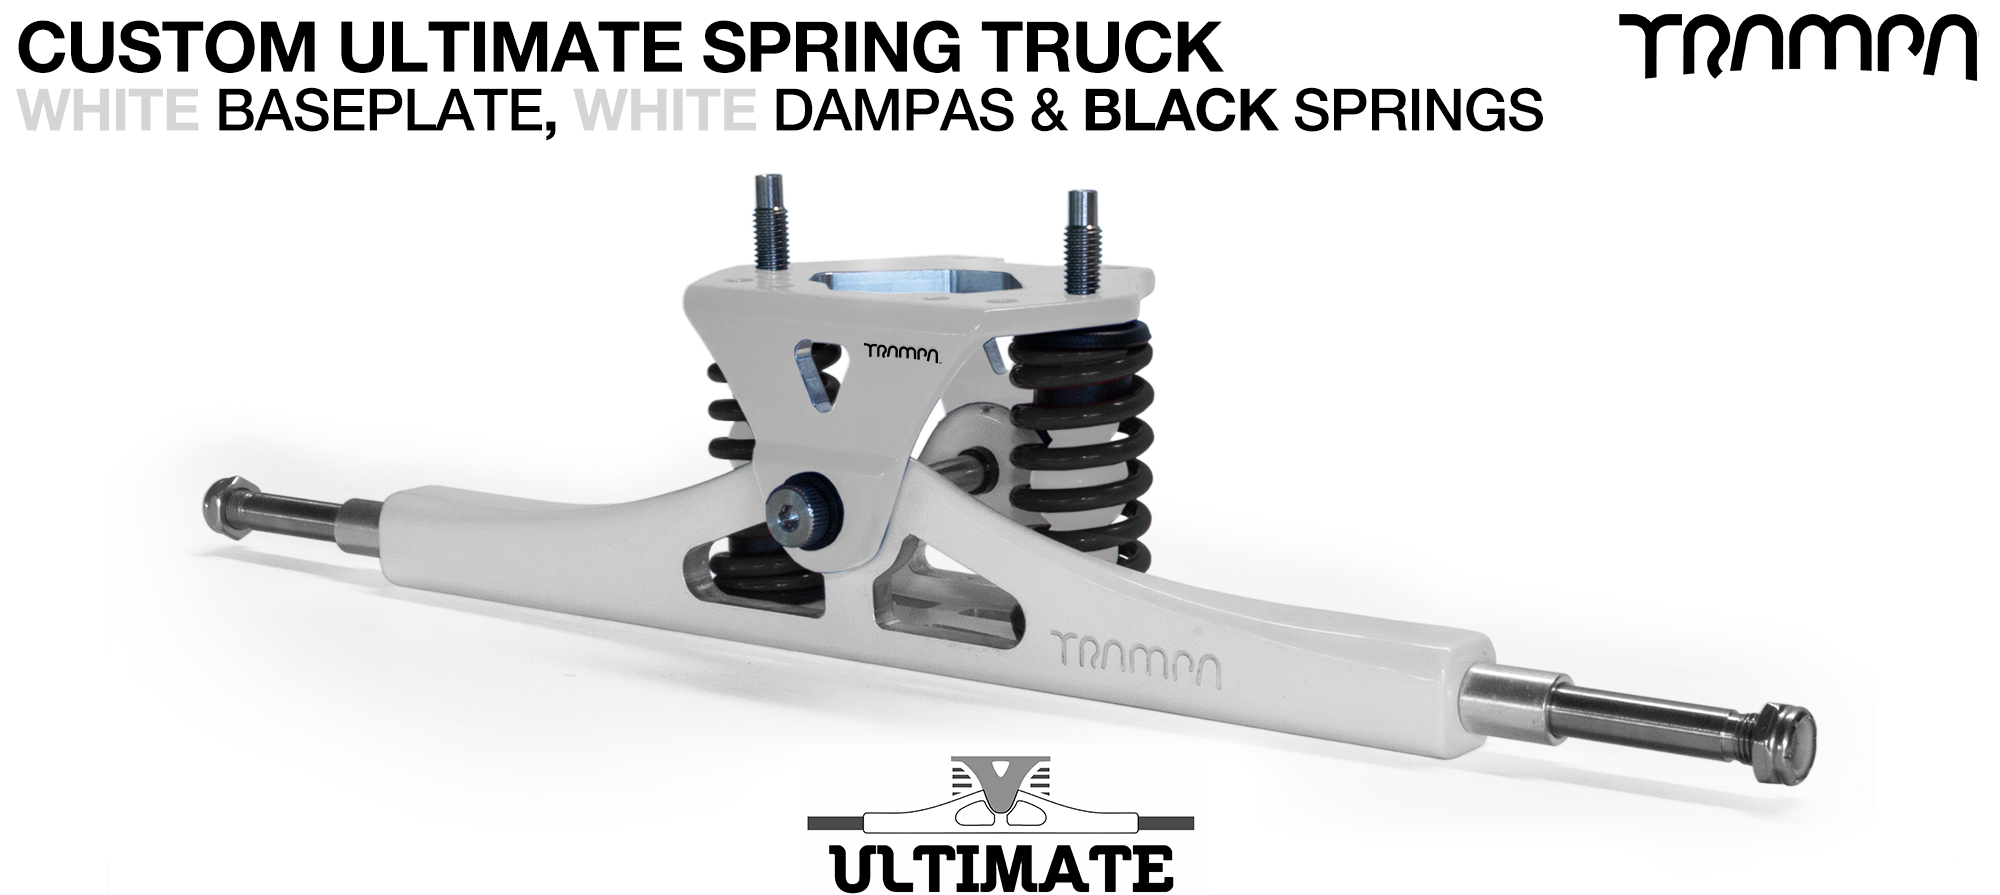 ULTIMATE ATB Truck - WHITE Hanger with TITANIUM Axles 1 Spring position